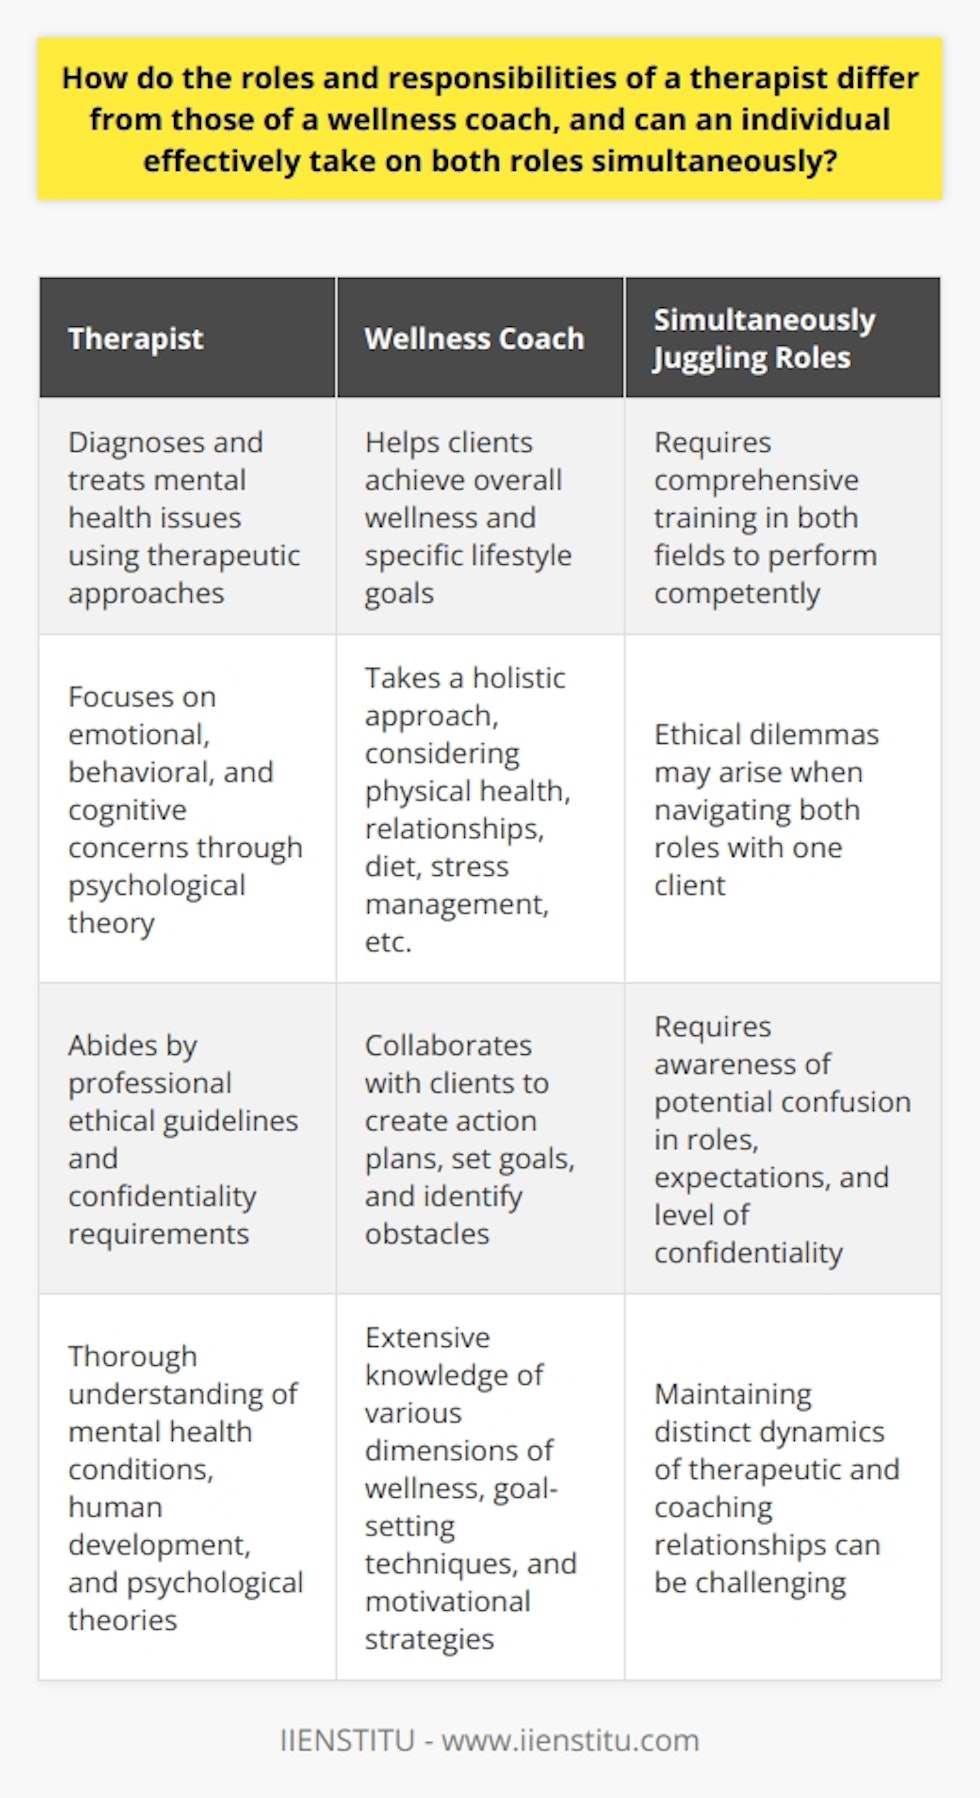 Role Differences Between Therapists and Wellness CoachesTherapists and wellness coaches have distinct roles and responsibilities in supporting client well-being. A therapist is a licensed mental health professional who diagnoses and treats mental health issues using different therapeutic approaches. Their focus is on addressing emotional, behavioral, and cognitive concerns through psychological theory. Therapists aim to deeply understand their clients and abide by professional ethical guidelines and confidentiality requirements.On the other hand, a wellness coach helps clients achieve overall wellness and specific lifestyle goals. They take a holistic approach to well-being, considering physical health, relationships, diet, stress management, and more. Rather than diagnosing or treating mental health issues, wellness coaches collaborate with clients to create action plans, set goals, and identify potential obstacles. Coaching sessions are structured and goal-oriented. While coaches have a responsibility to care for their clients, they may not be bound by the same ethical standards and confidentiality requirements as therapists.Simultaneously Juggling RolesWhile it is possible to take on both roles simultaneously, effectively managing these responsibilities can pose challenges. Firstly, therapists and wellness coaches require different skill sets and knowledge bases, necessitating comprehensive training in both fields to perform competently. A therapist needs a thorough understanding of mental health conditions, human development, and psychological theories. On the other hand, a wellness coach must possess extensive knowledge of various dimensions of wellness, goal-setting techniques, and motivational strategies.Secondly, ethical dilemmas may arise when trying to navigate both roles with one client. Therapists must maintain strict confidentiality, while wellness coaches may need to collaborate with a client's support network to achieve specific goals. Blurring these professional boundaries can lead to confusion regarding roles, expectations, and the level of confidentiality provided to the client.Lastly, the therapeutic relationship and coaching dynamics differ fundamentally. Therapeutic relationships often involve deep emotional exploration, whereas coaching relationships tend to be more dynamic and action-focused. Maintaining these distinct dynamics can be challenging when providing both services to a single client.In conclusion, therapists and wellness coaches have different roles, responsibilities, and approaches, despite their shared goal of promoting well-being. While it is possible to undertake both roles simultaneously, extensive training and awareness of potential ethical dilemmas and relationship dynamics are necessary to provide the best care for clients.Note: The use of the term IIENSTITU is not necessary for this topic and does not provide any value.